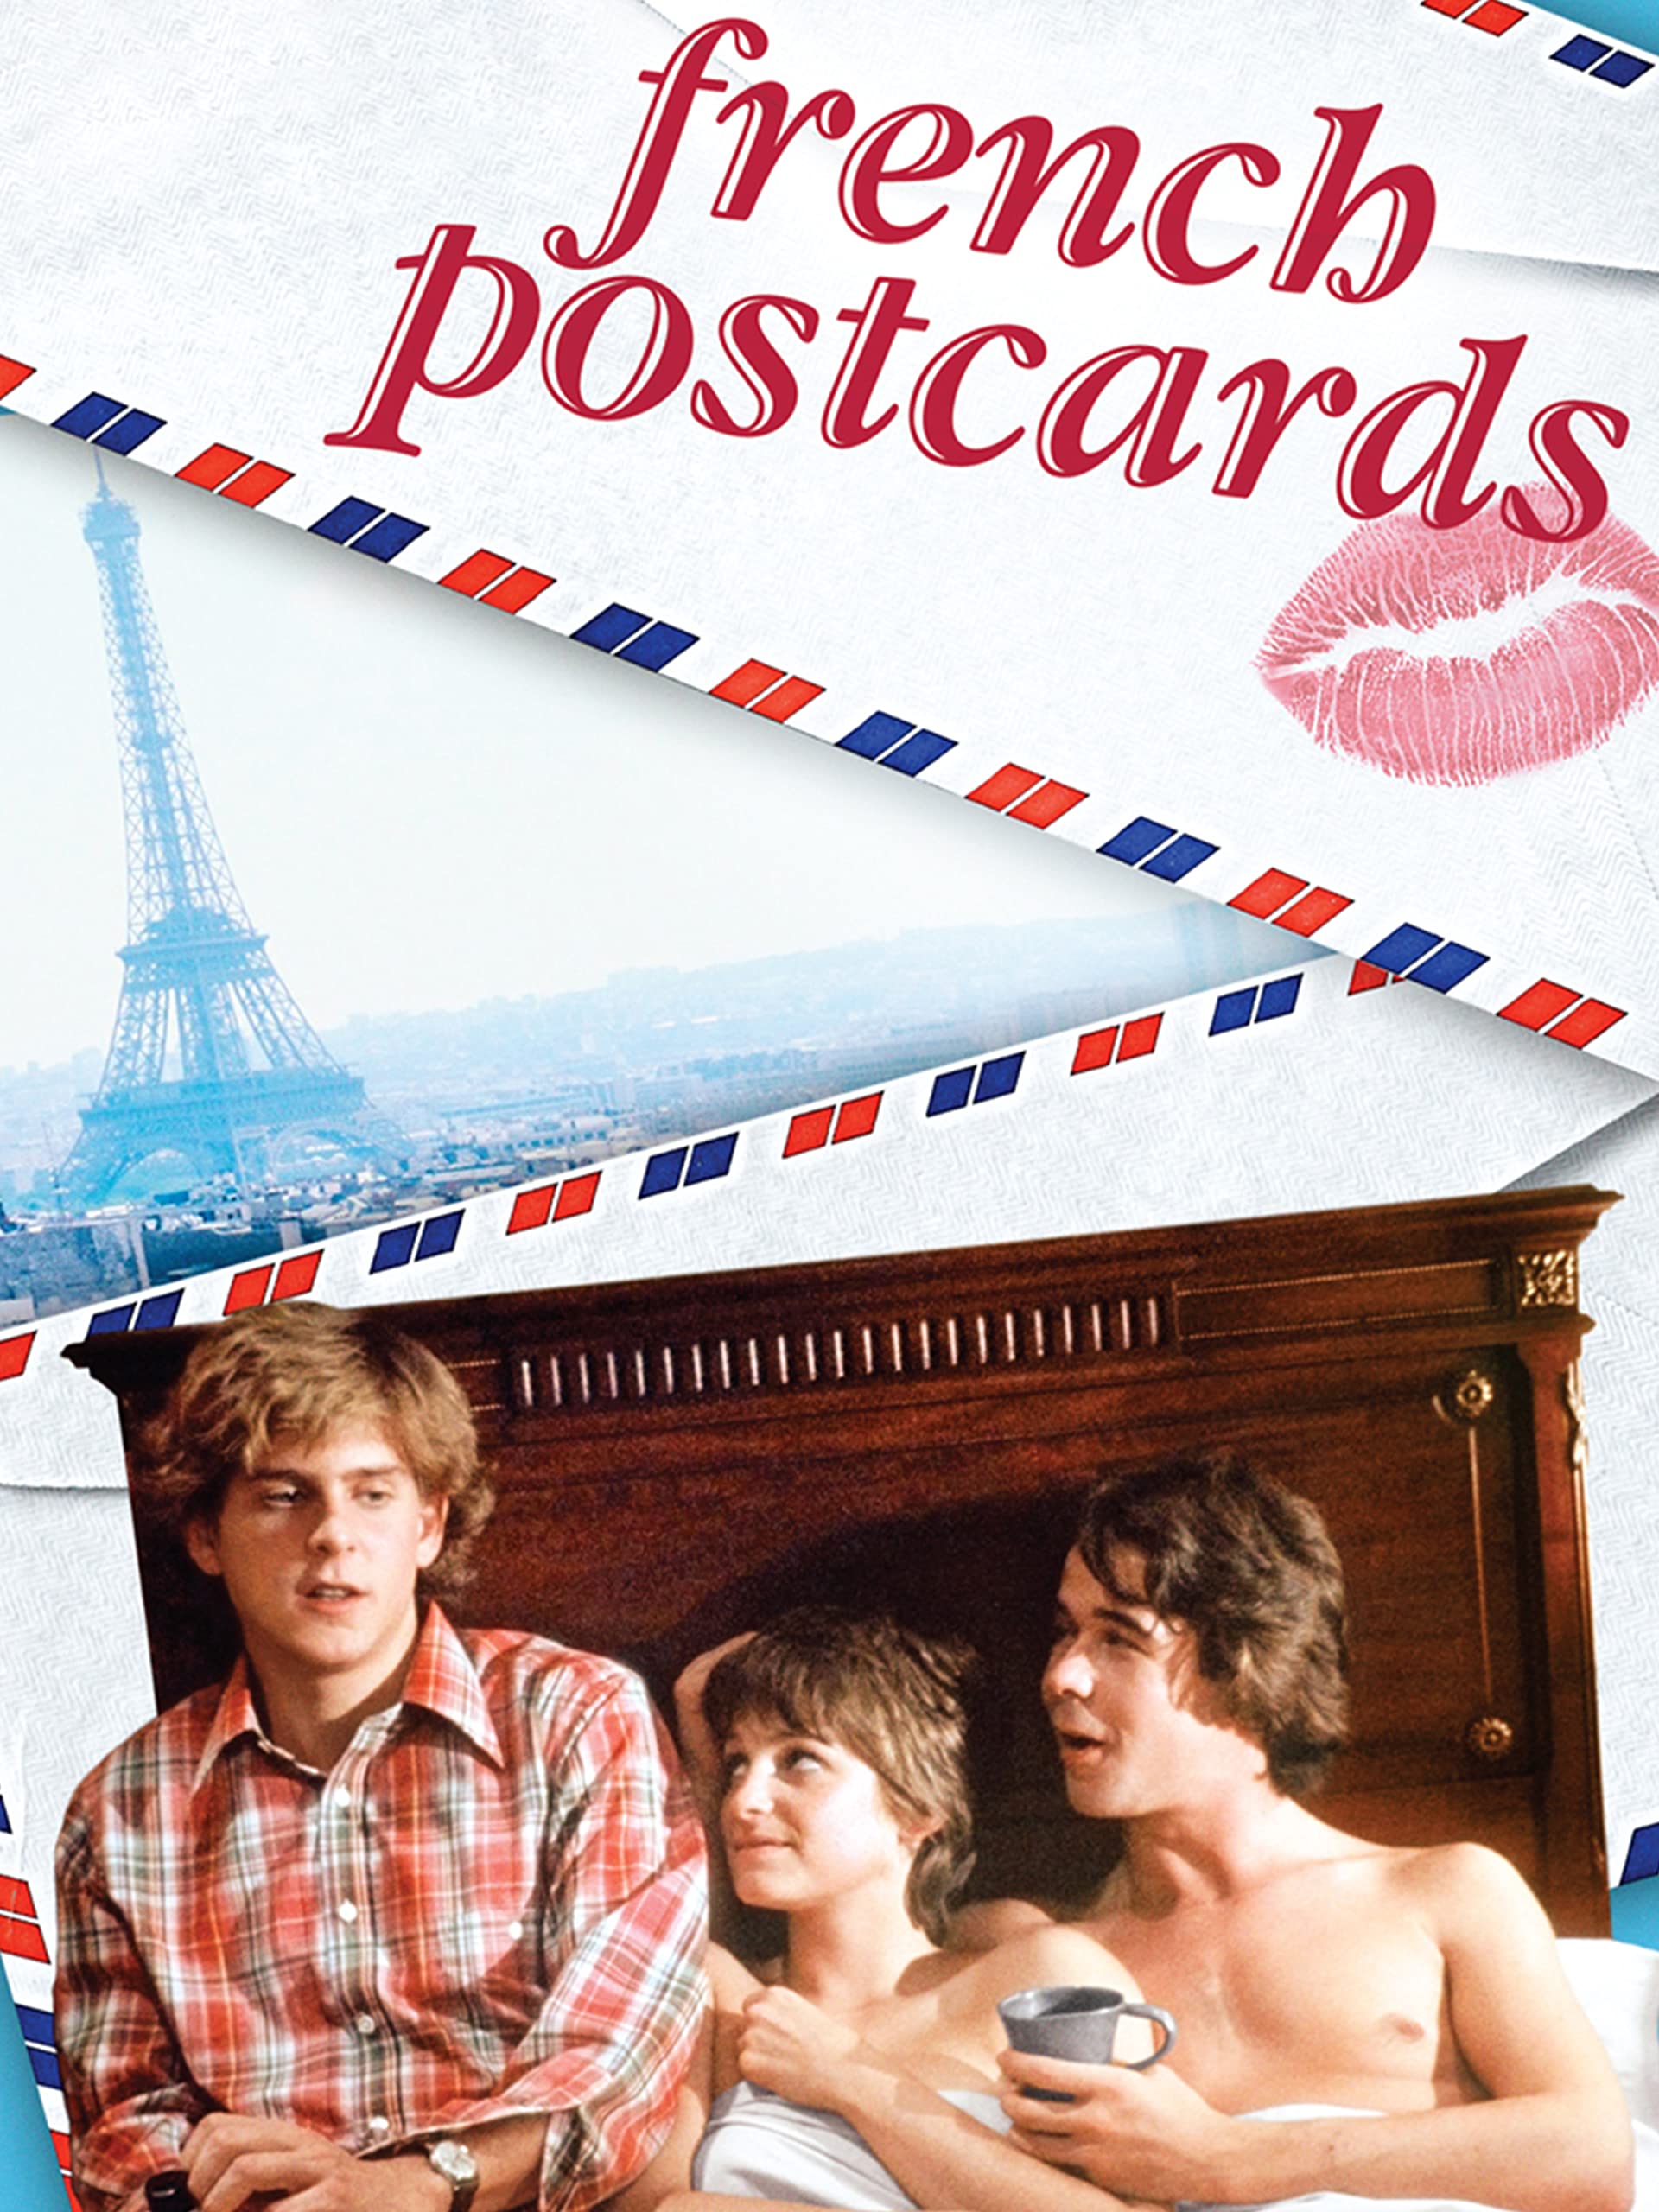 French Postcards